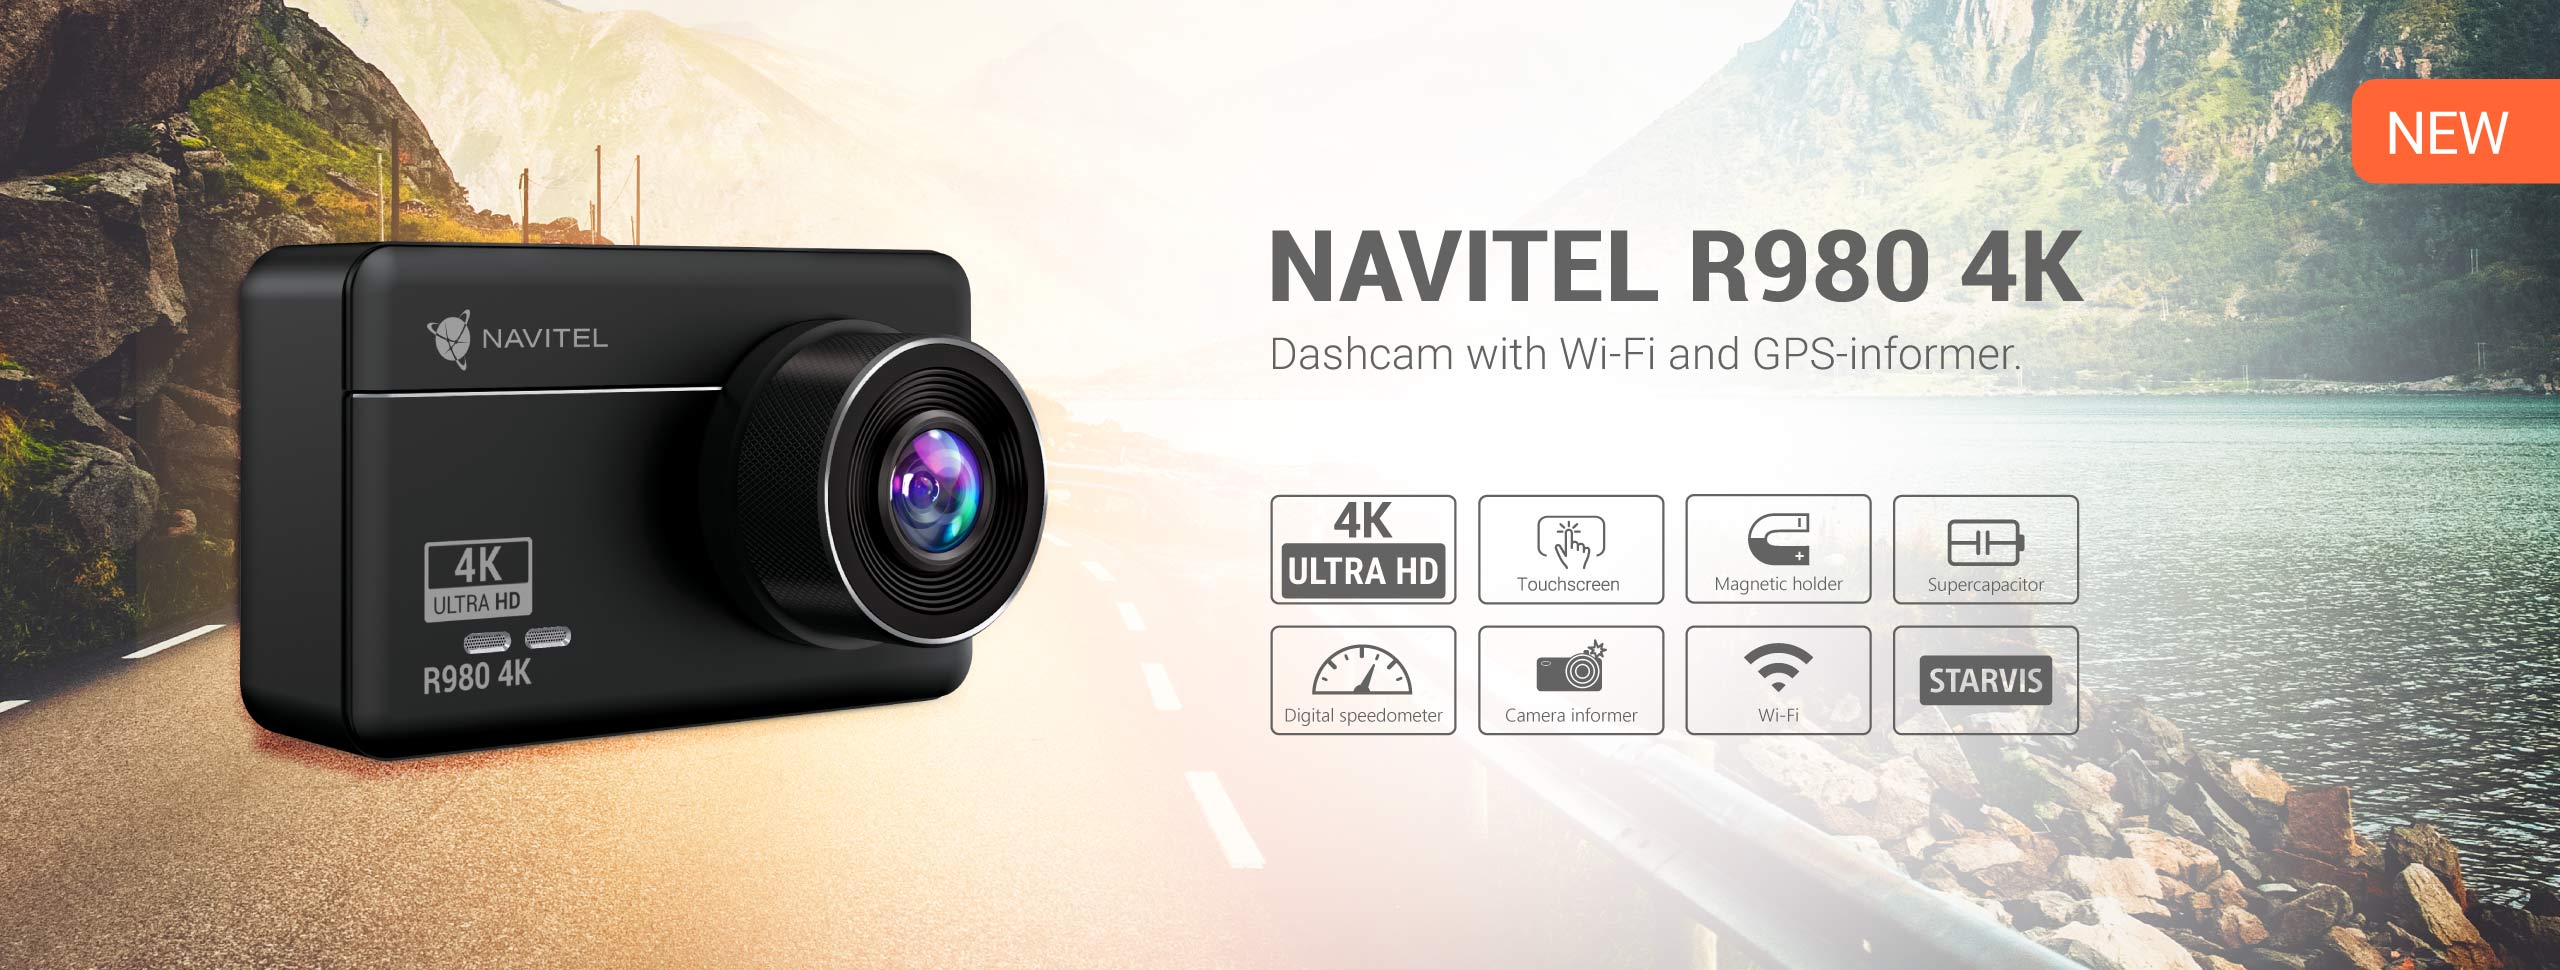 NAVITEL R980 4K is Now Available for Purchase